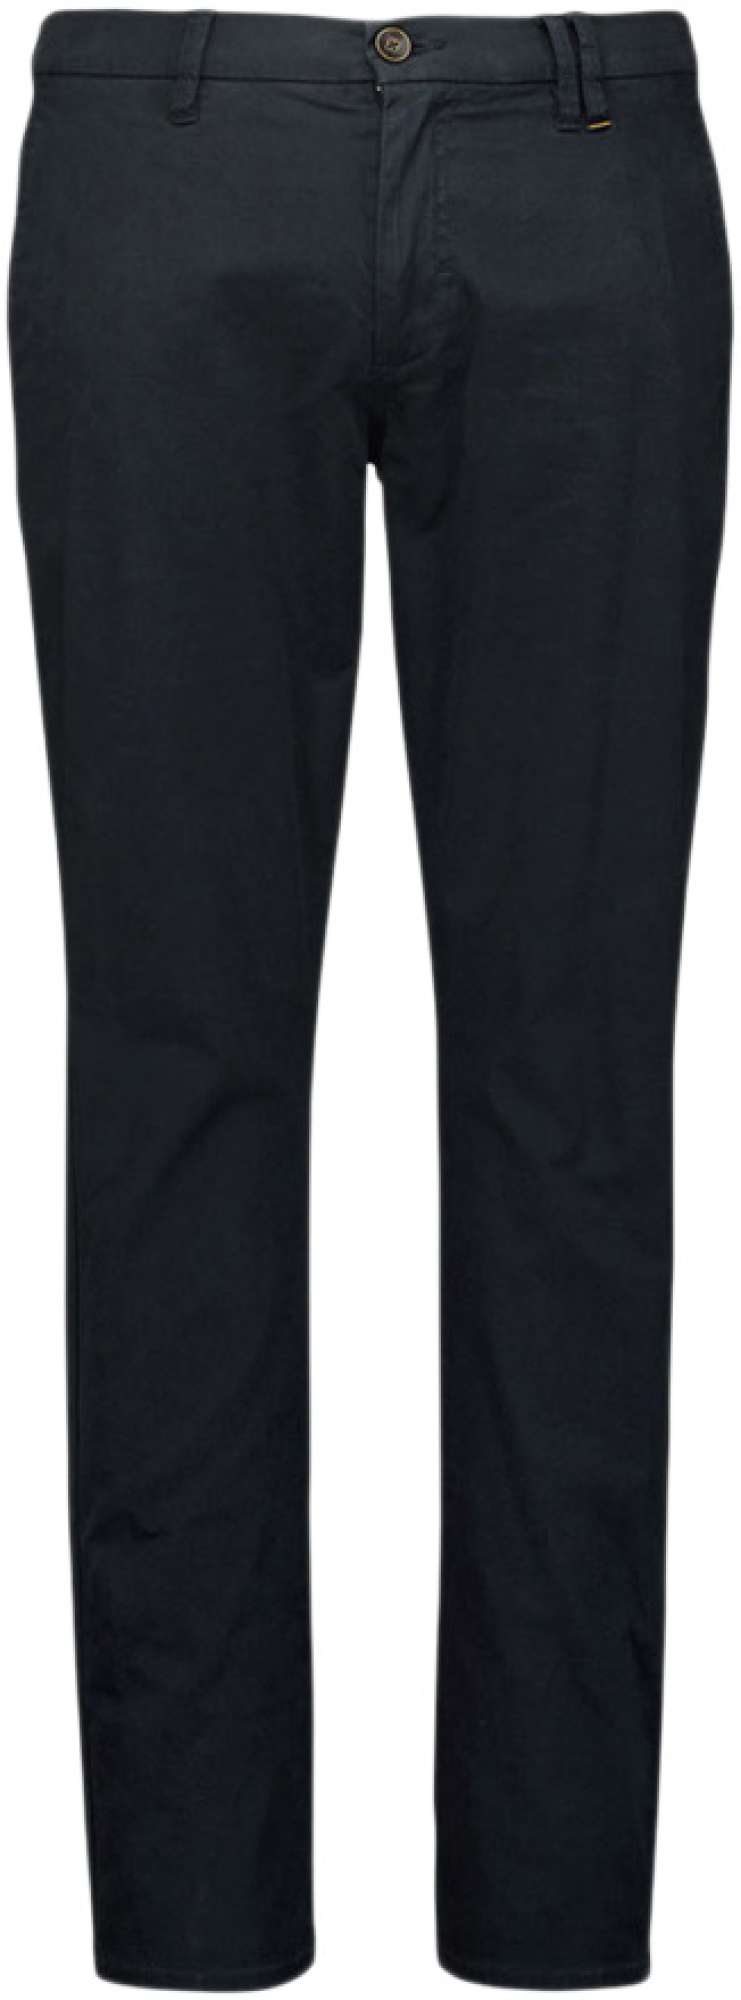 Afbeelding van No Excess Pants chino garment dyed stretch night